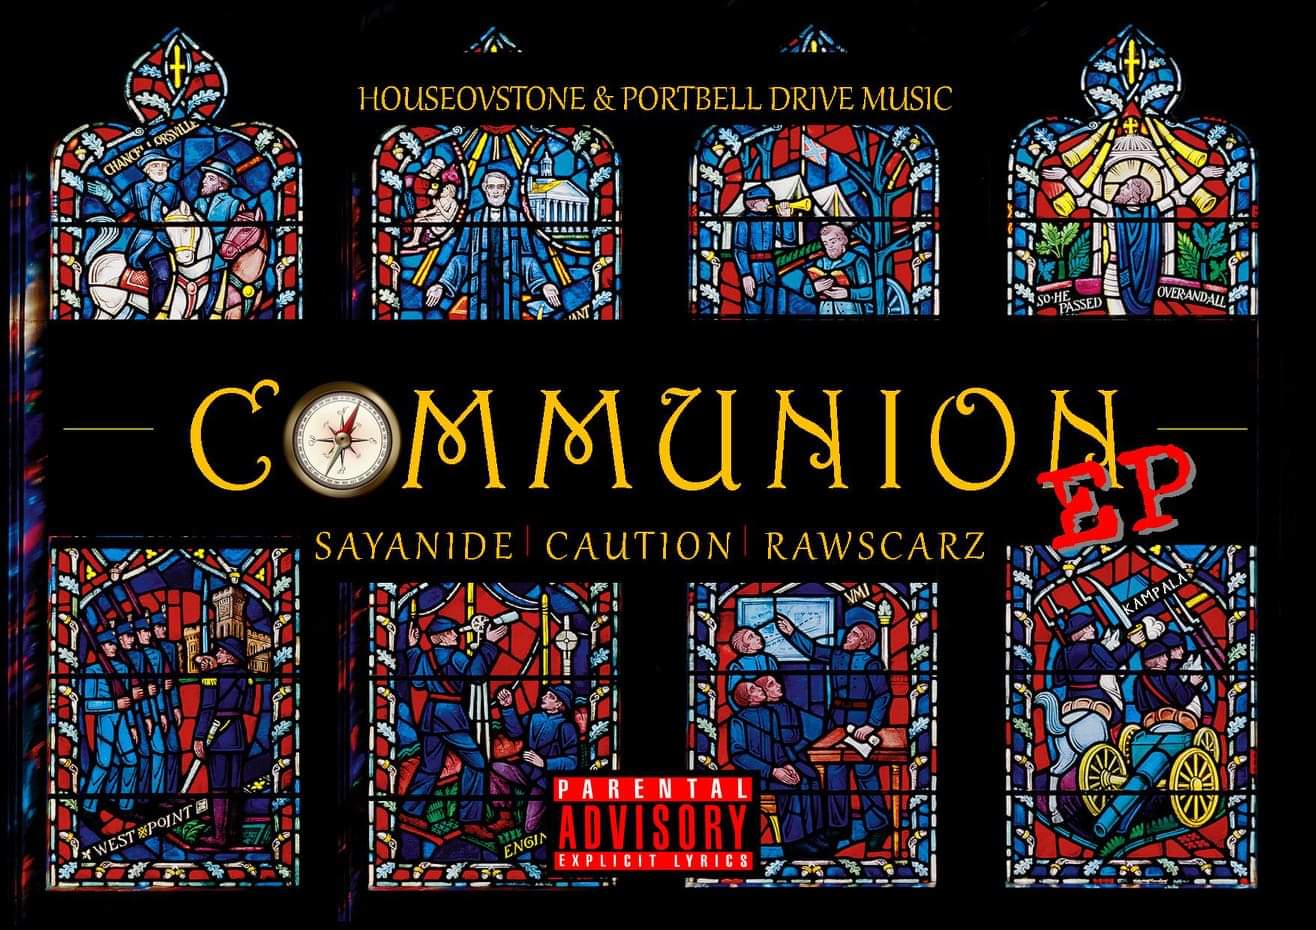 Blaylock, Sayanide & Omulenzi Caution have released the Communion EP